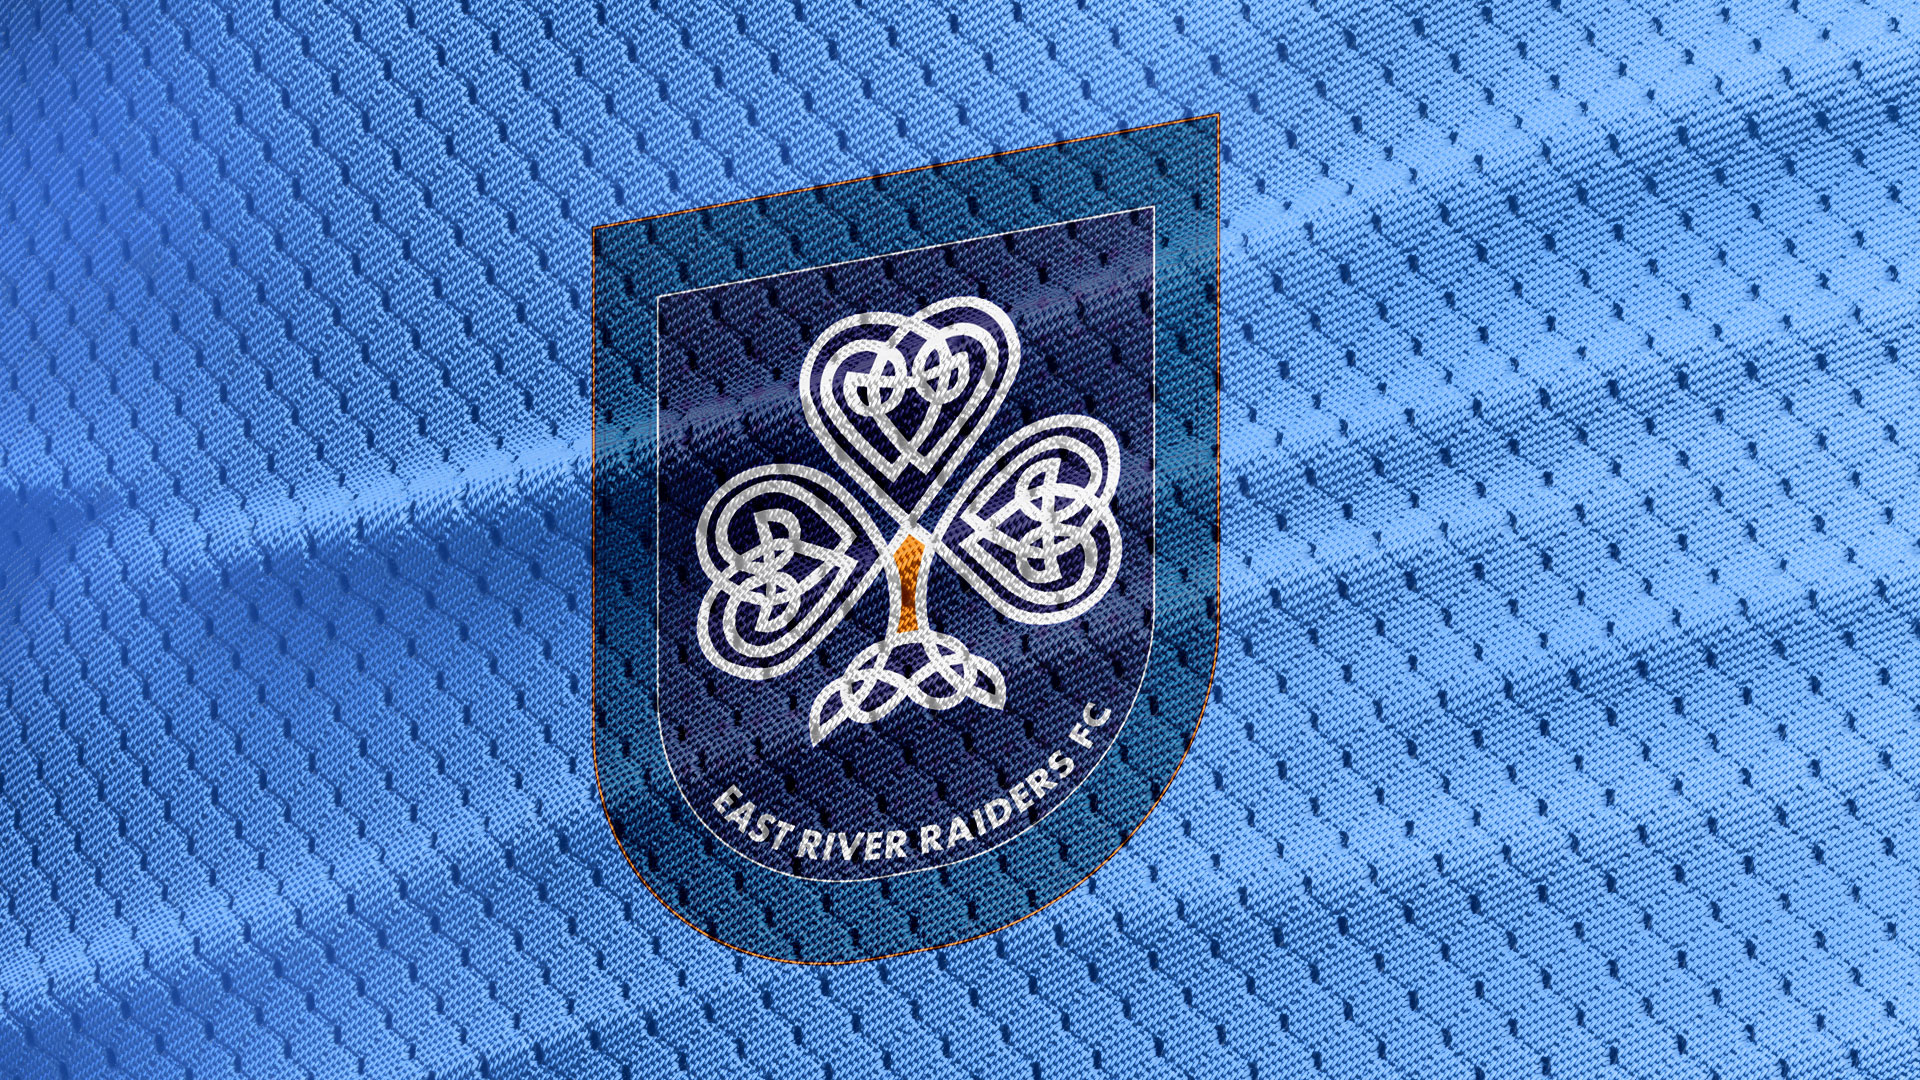 The East River Raiders emblem featured on a jersey.